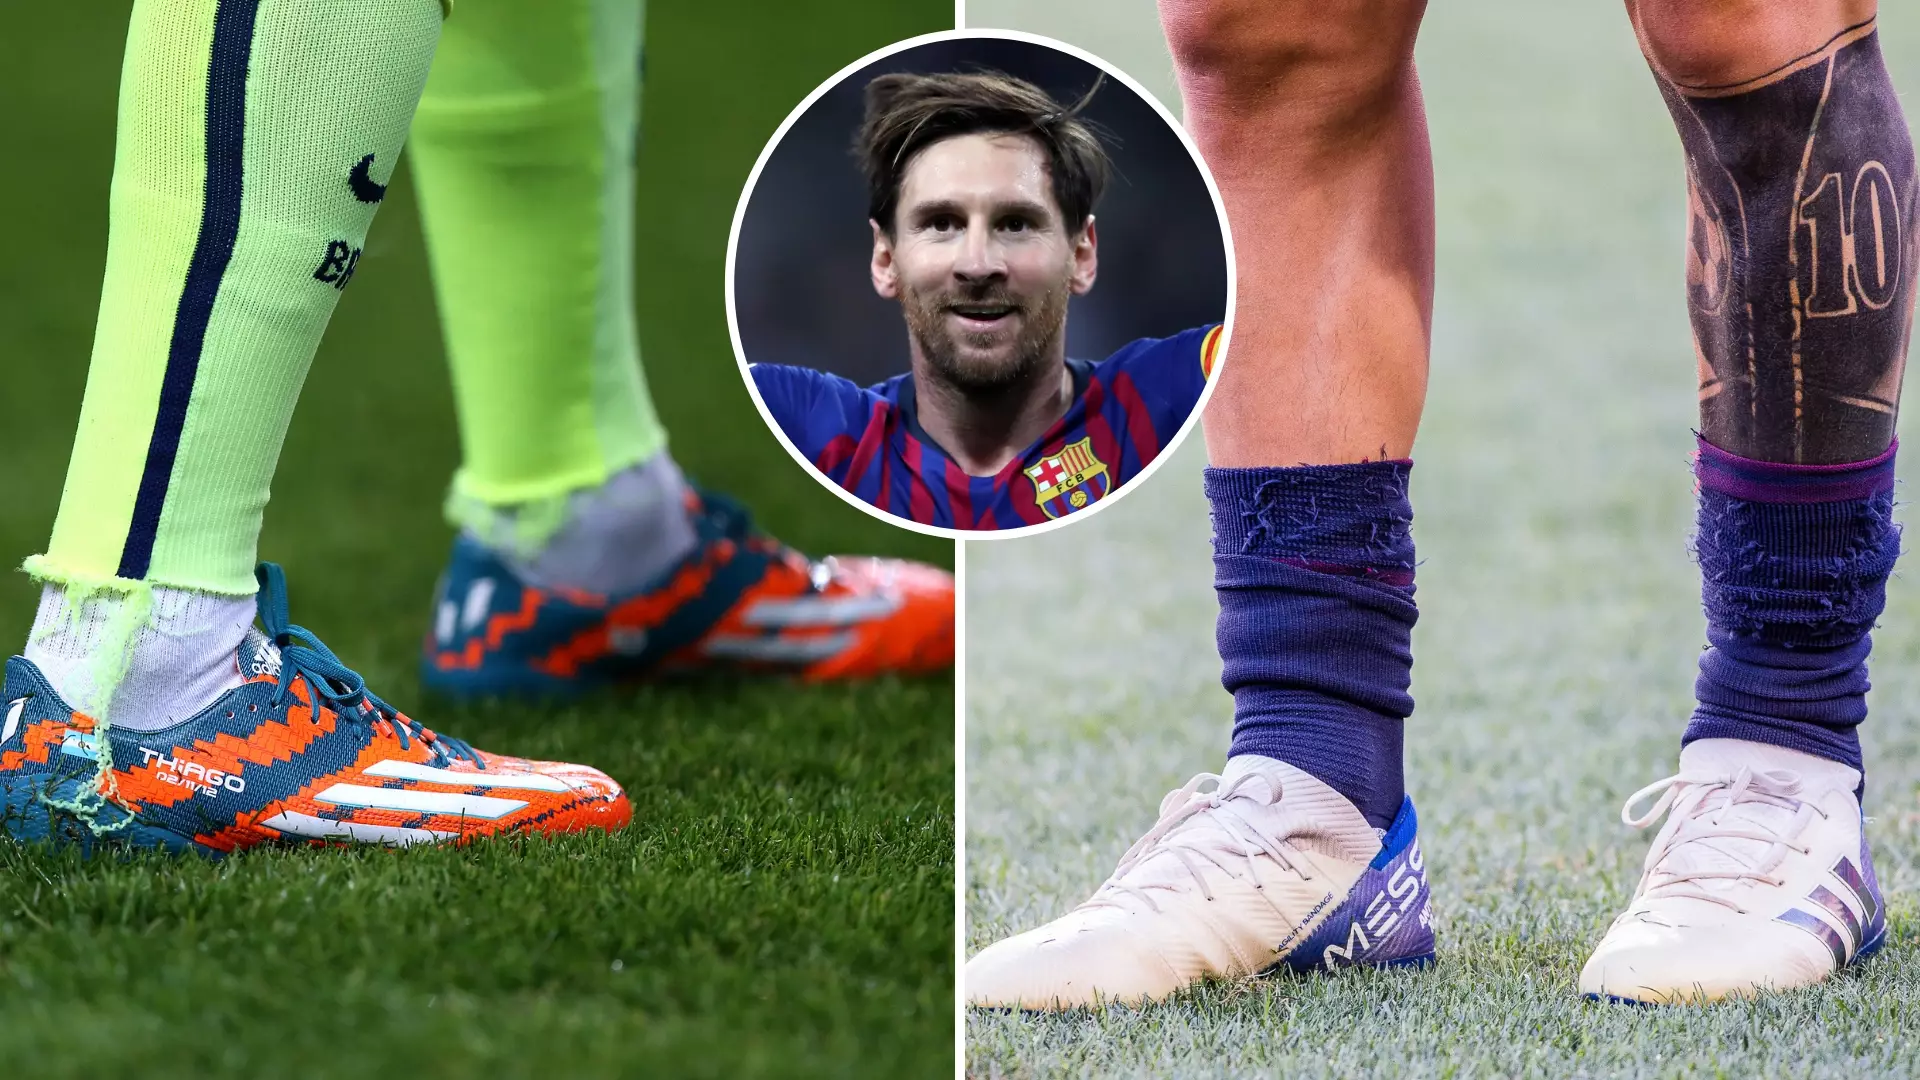 Just like Rooney, Lionel Messi has worn some amazing football boots.